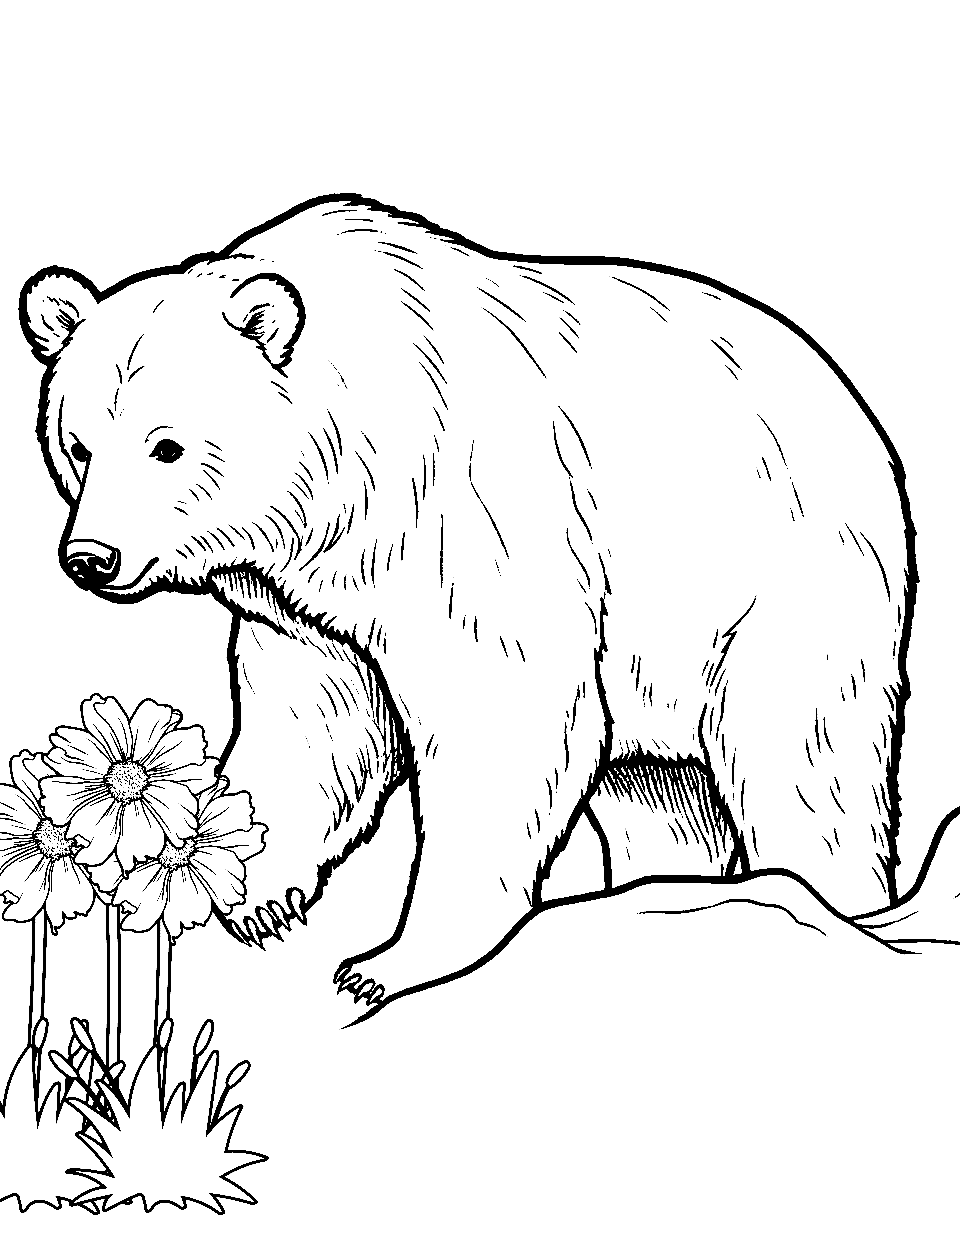 Bear's Spring Flowers Coloring Page - A bear sniffing a bunch of fresh spring flowers.